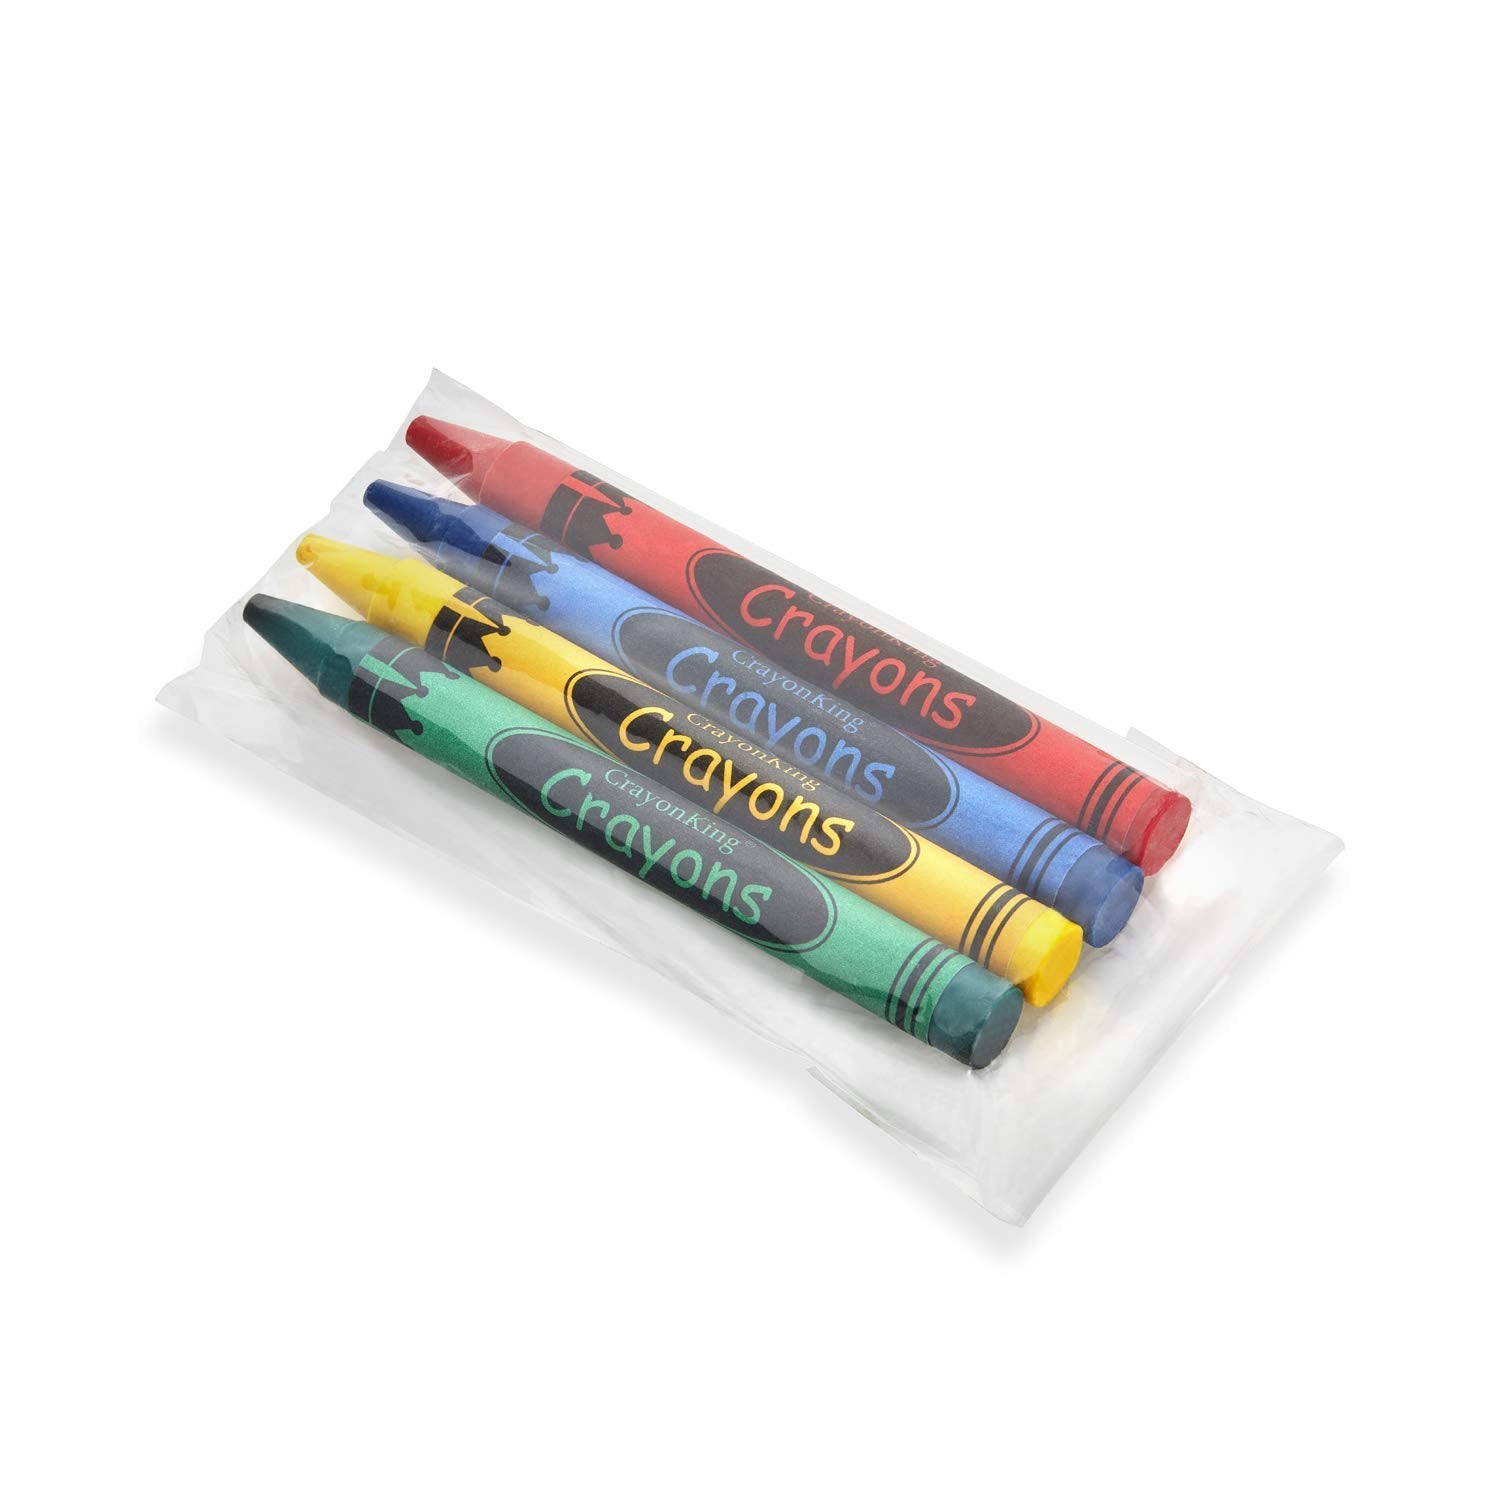 CrayonKing 50 Sets of 4-Packs in Cello (200 total bulk Crayons) Restaurants, Party Favors, Birthdays, School Teachers & Kids Coloring Non-Toxic Crayons